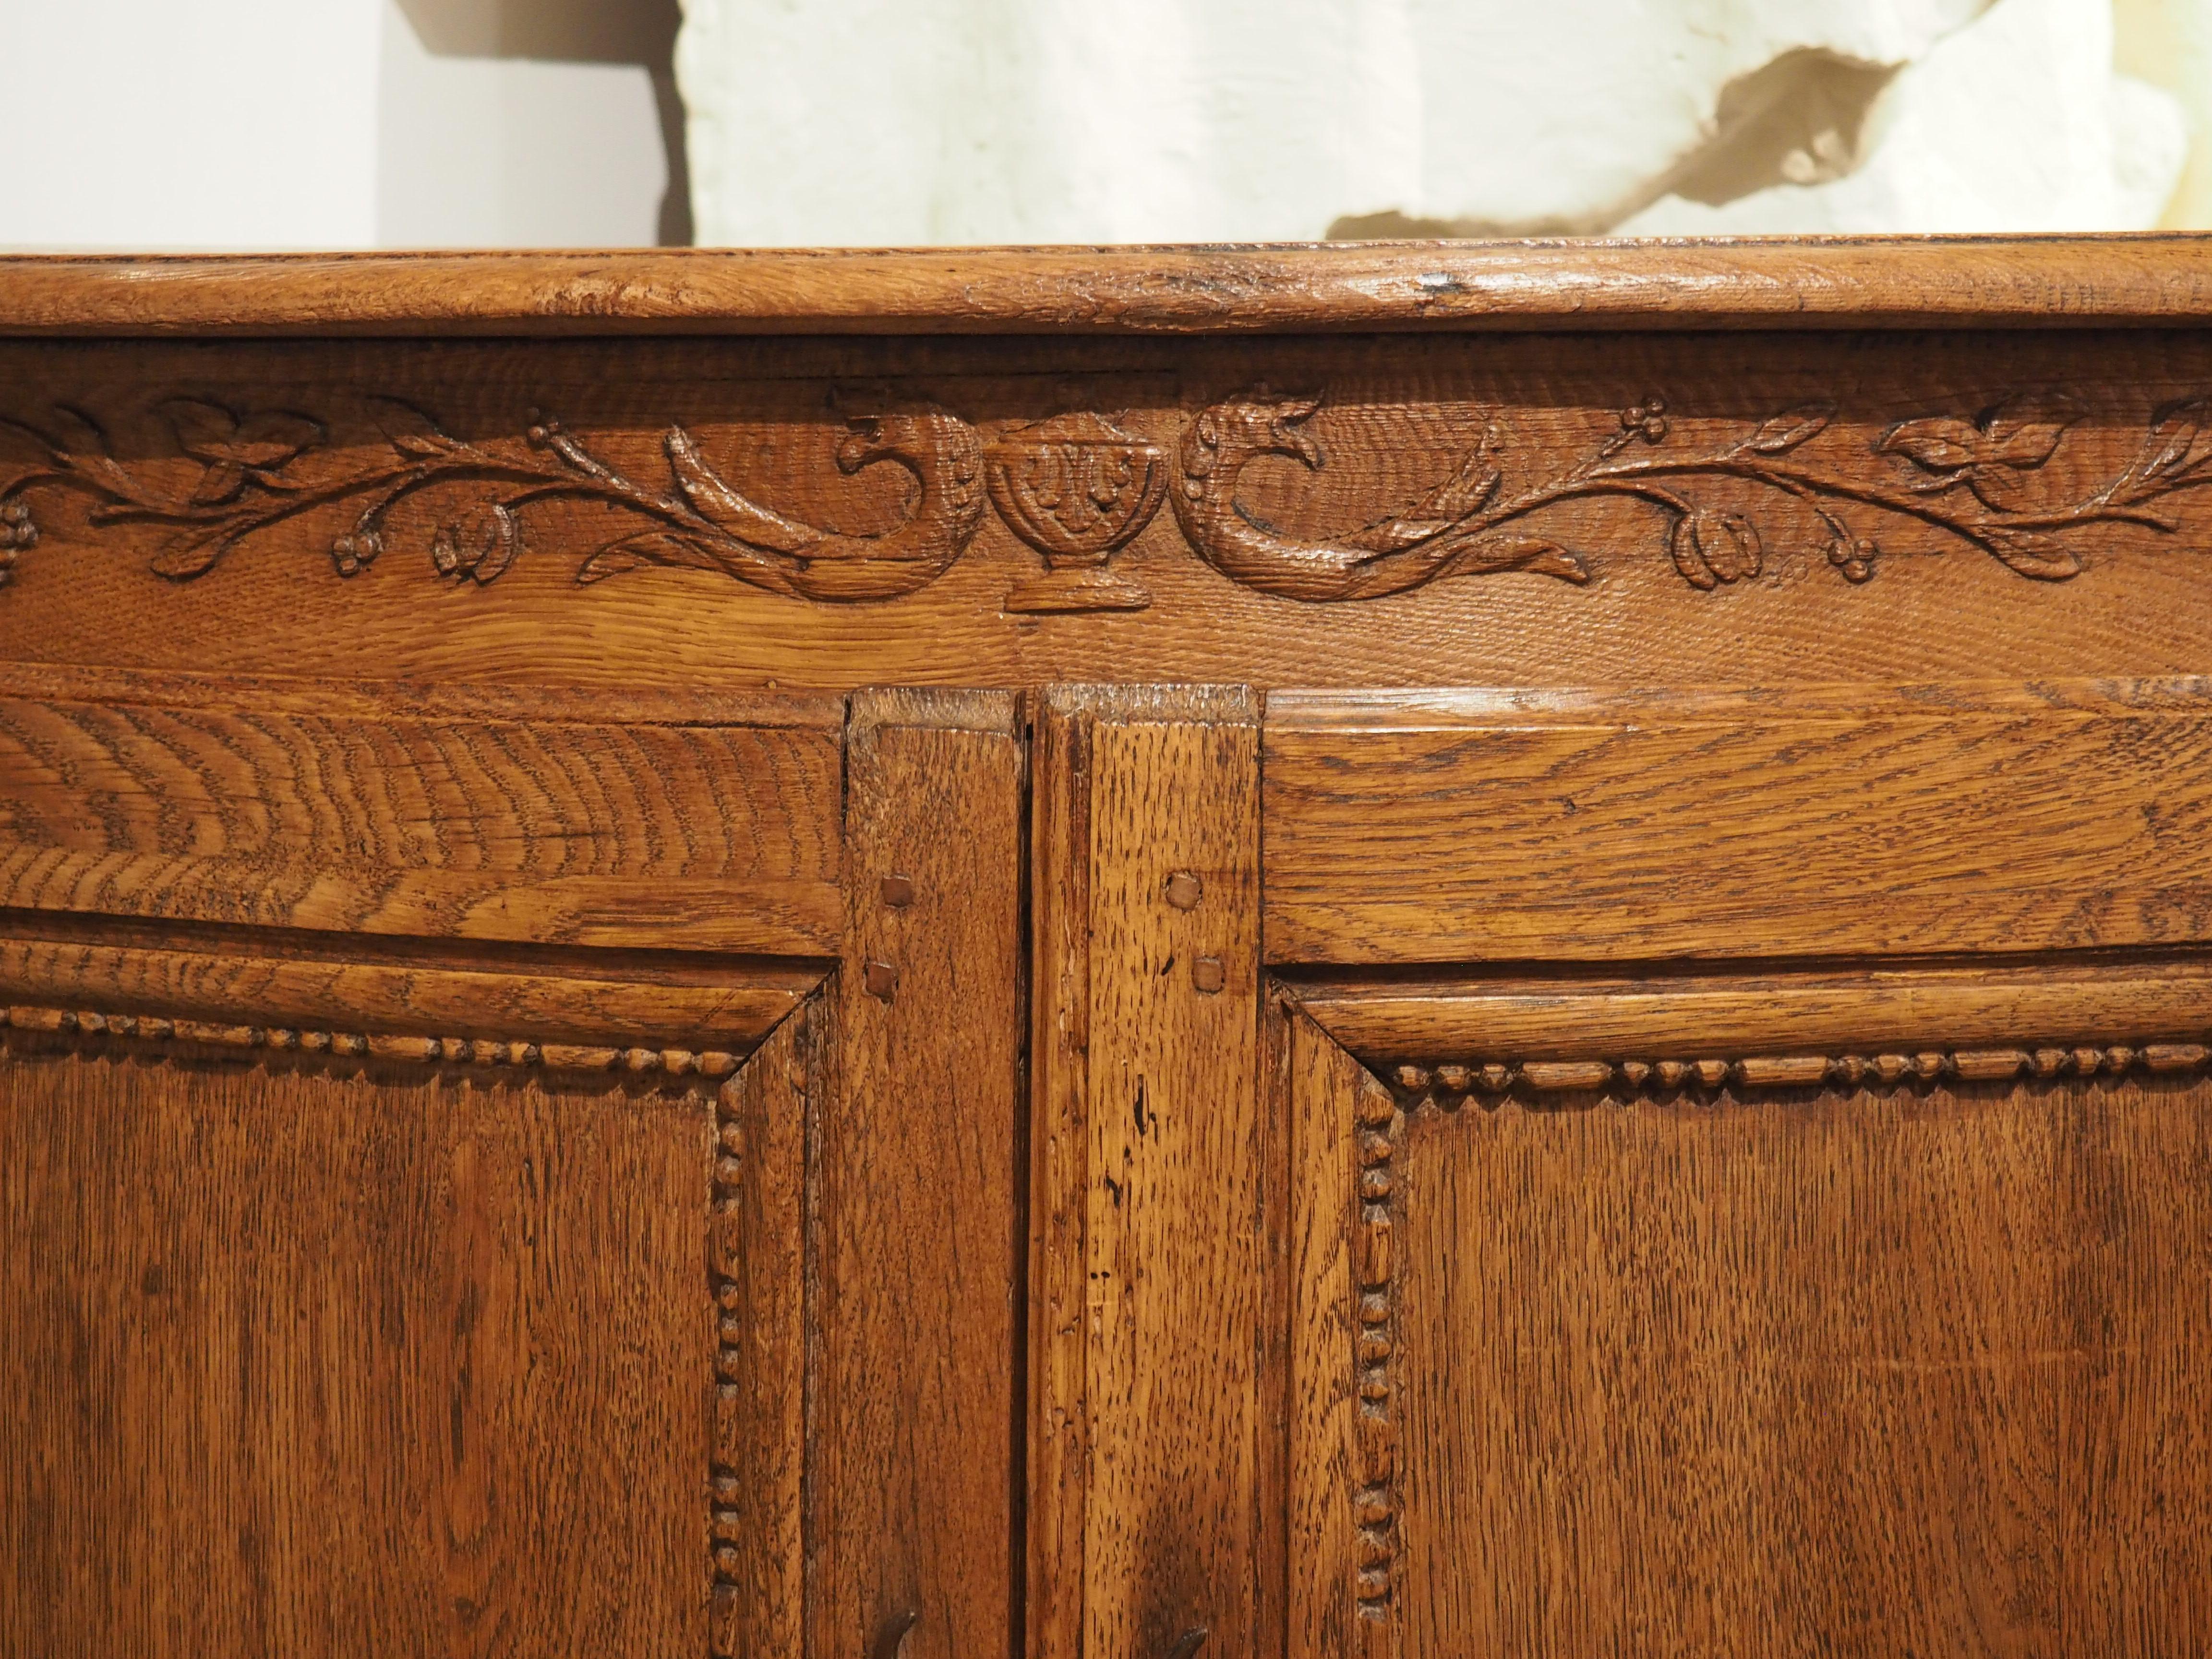 Introduce an elegant touch to your home with this exquisite 18th-century French corner cabinet. Meticulously crafted from oak and fruitwood, this stunning piece showcases a wedge-shaped interior shelf, adorned with delicate floral carvings and a